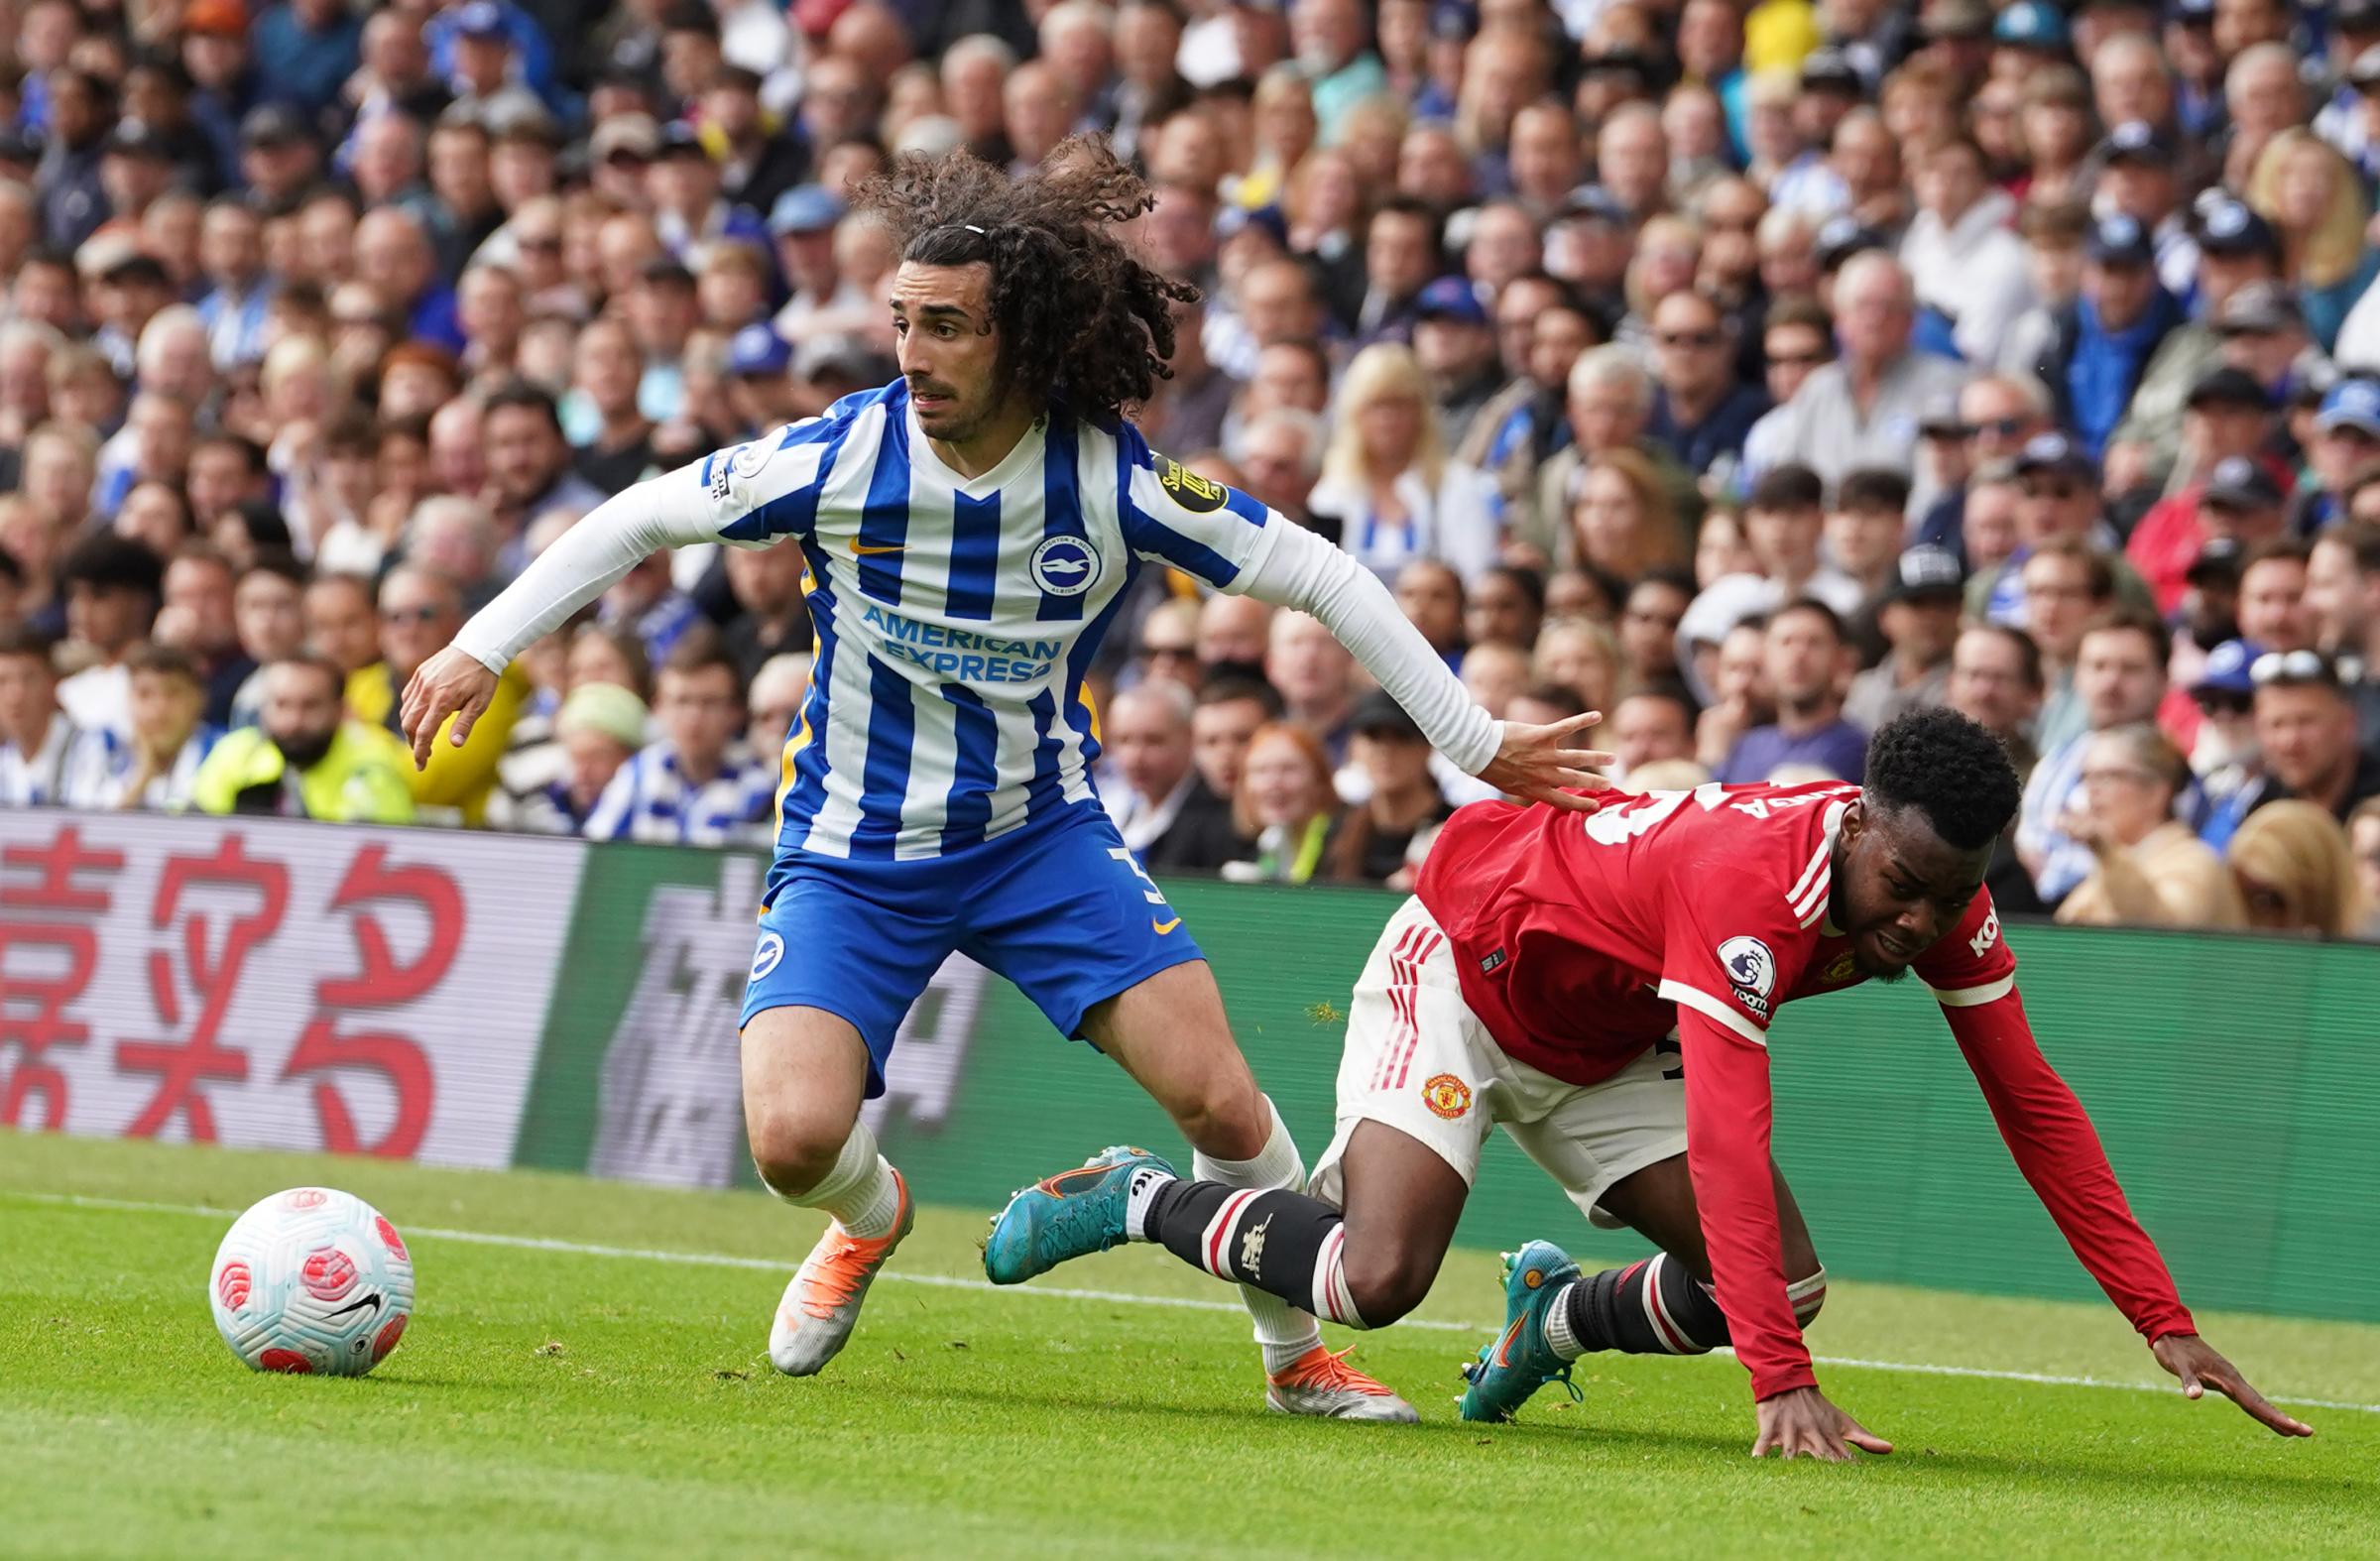 Marc Cucurella likely to be next Brighton talent targeted